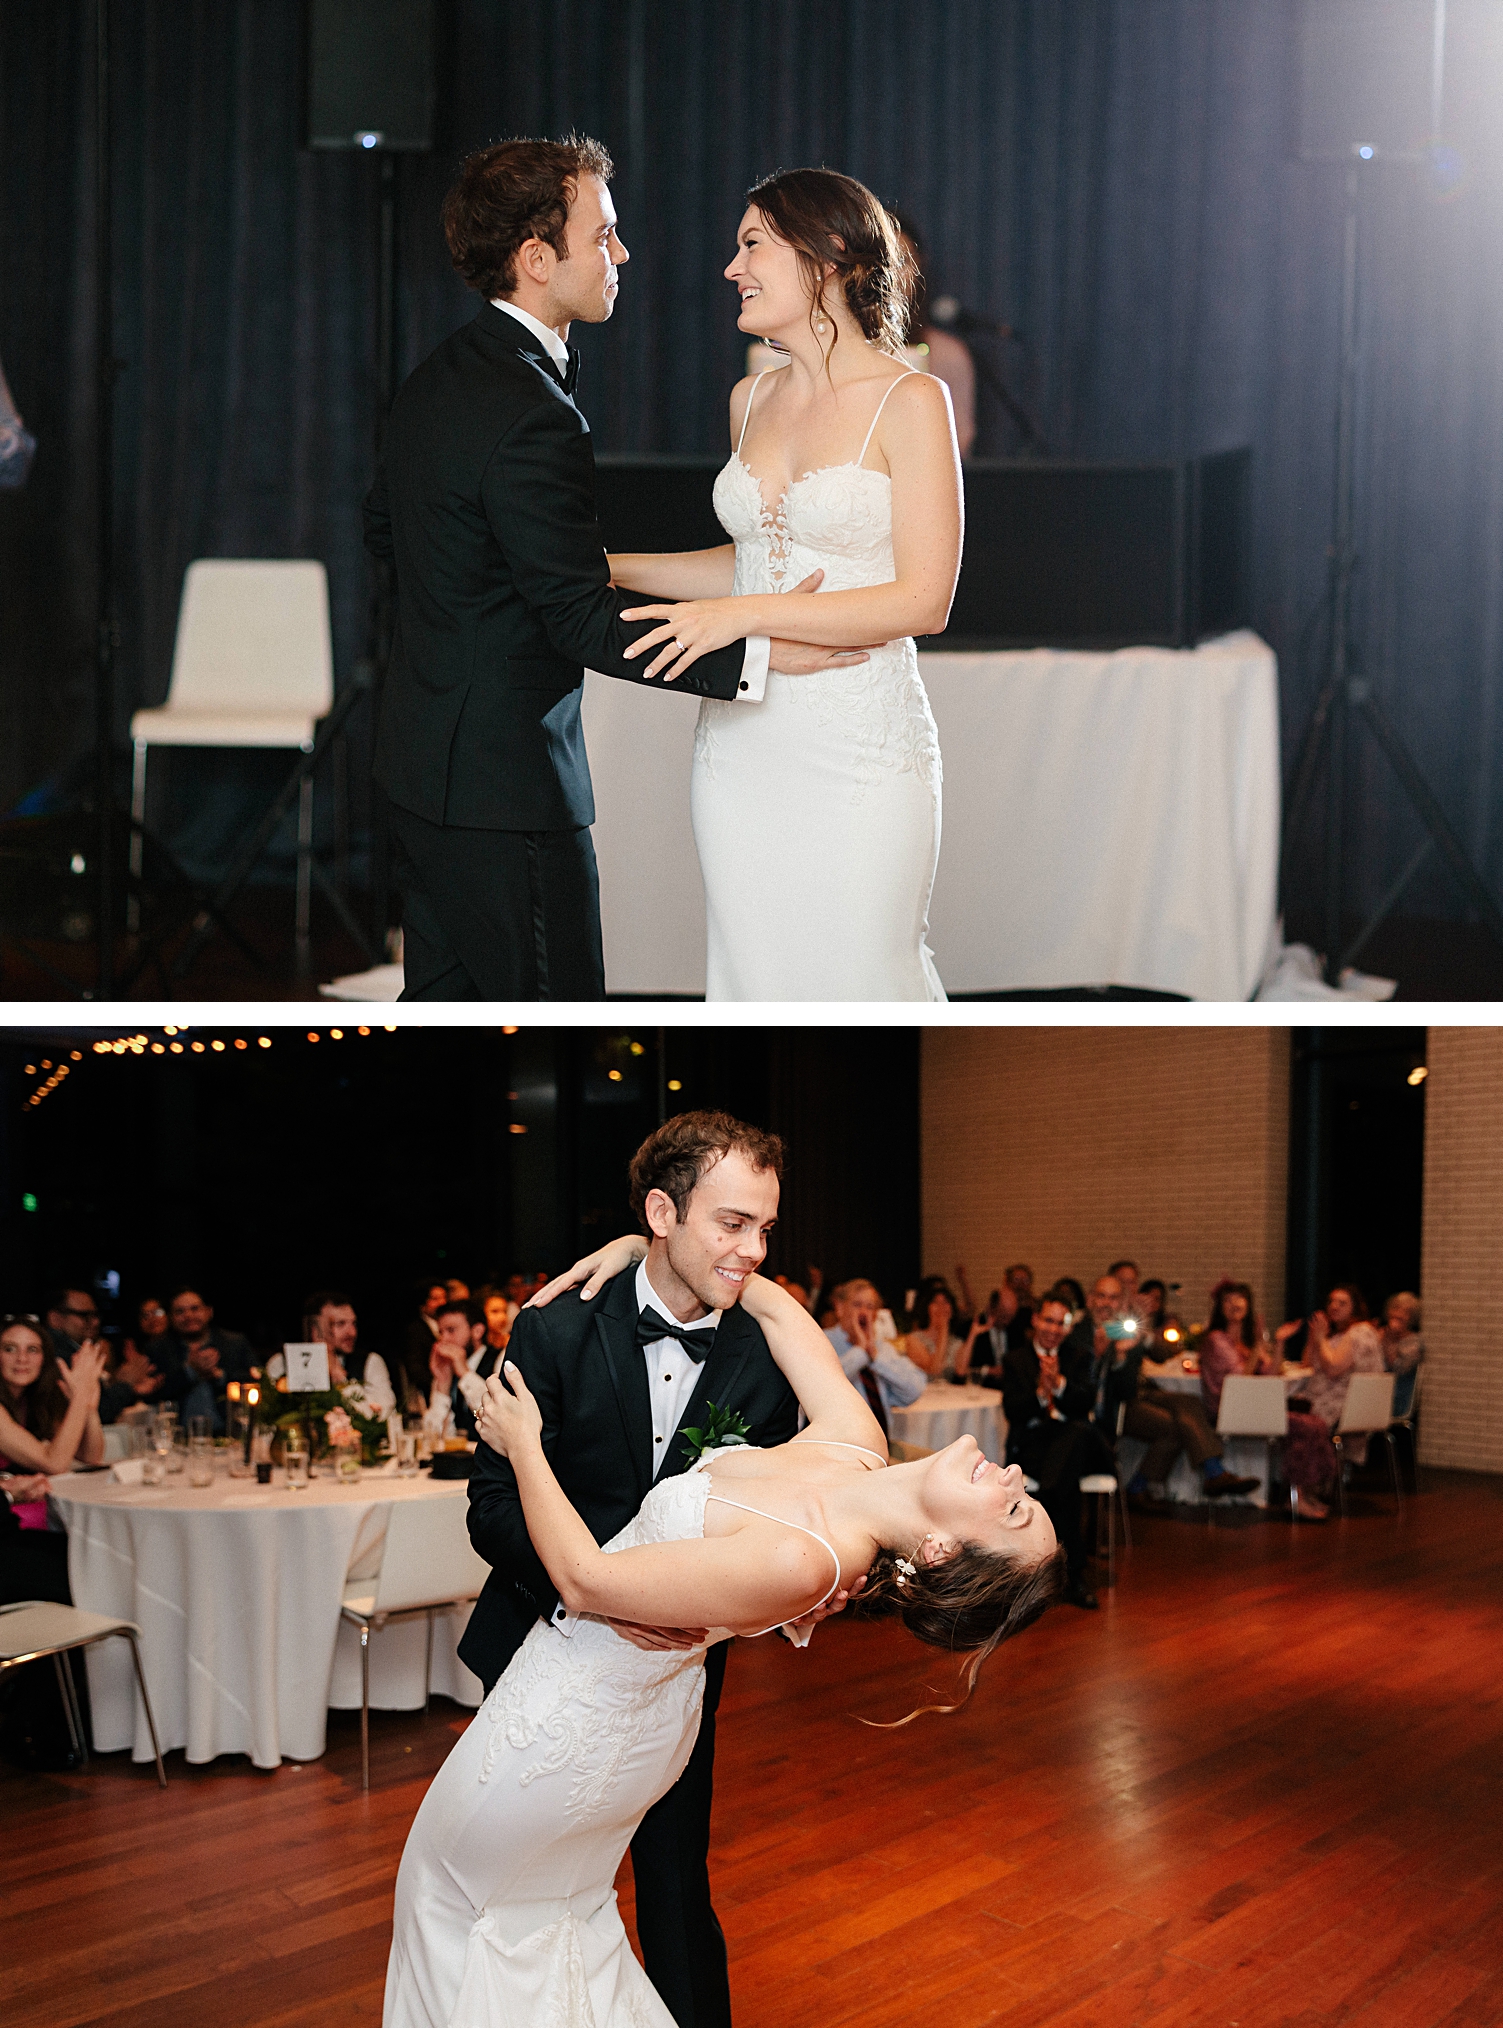 Bride and groom first dance wedding reception dip